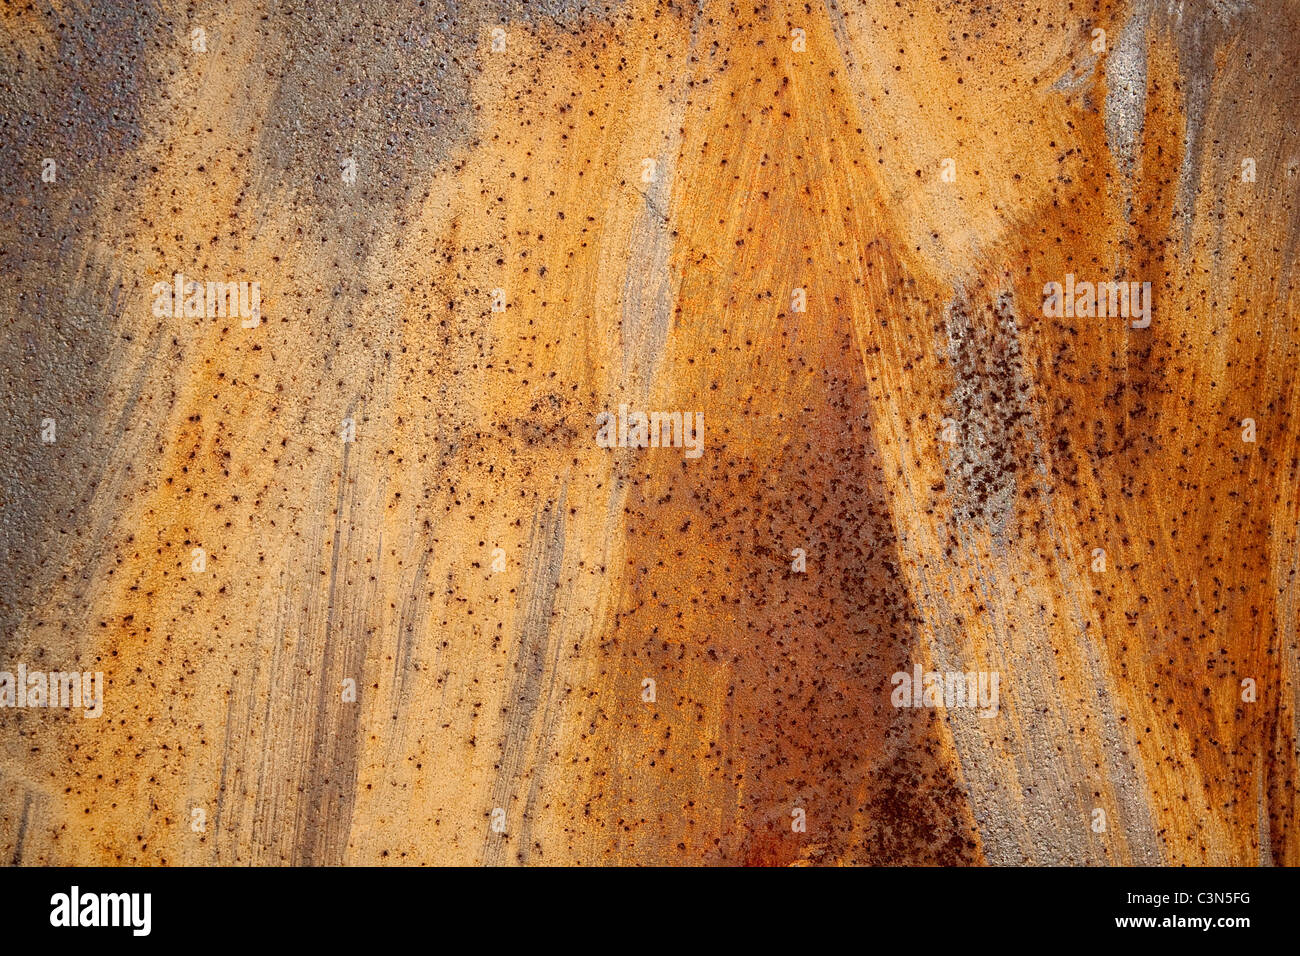 Photography shows a rusty metall background with scrachted surface. Stock Photo